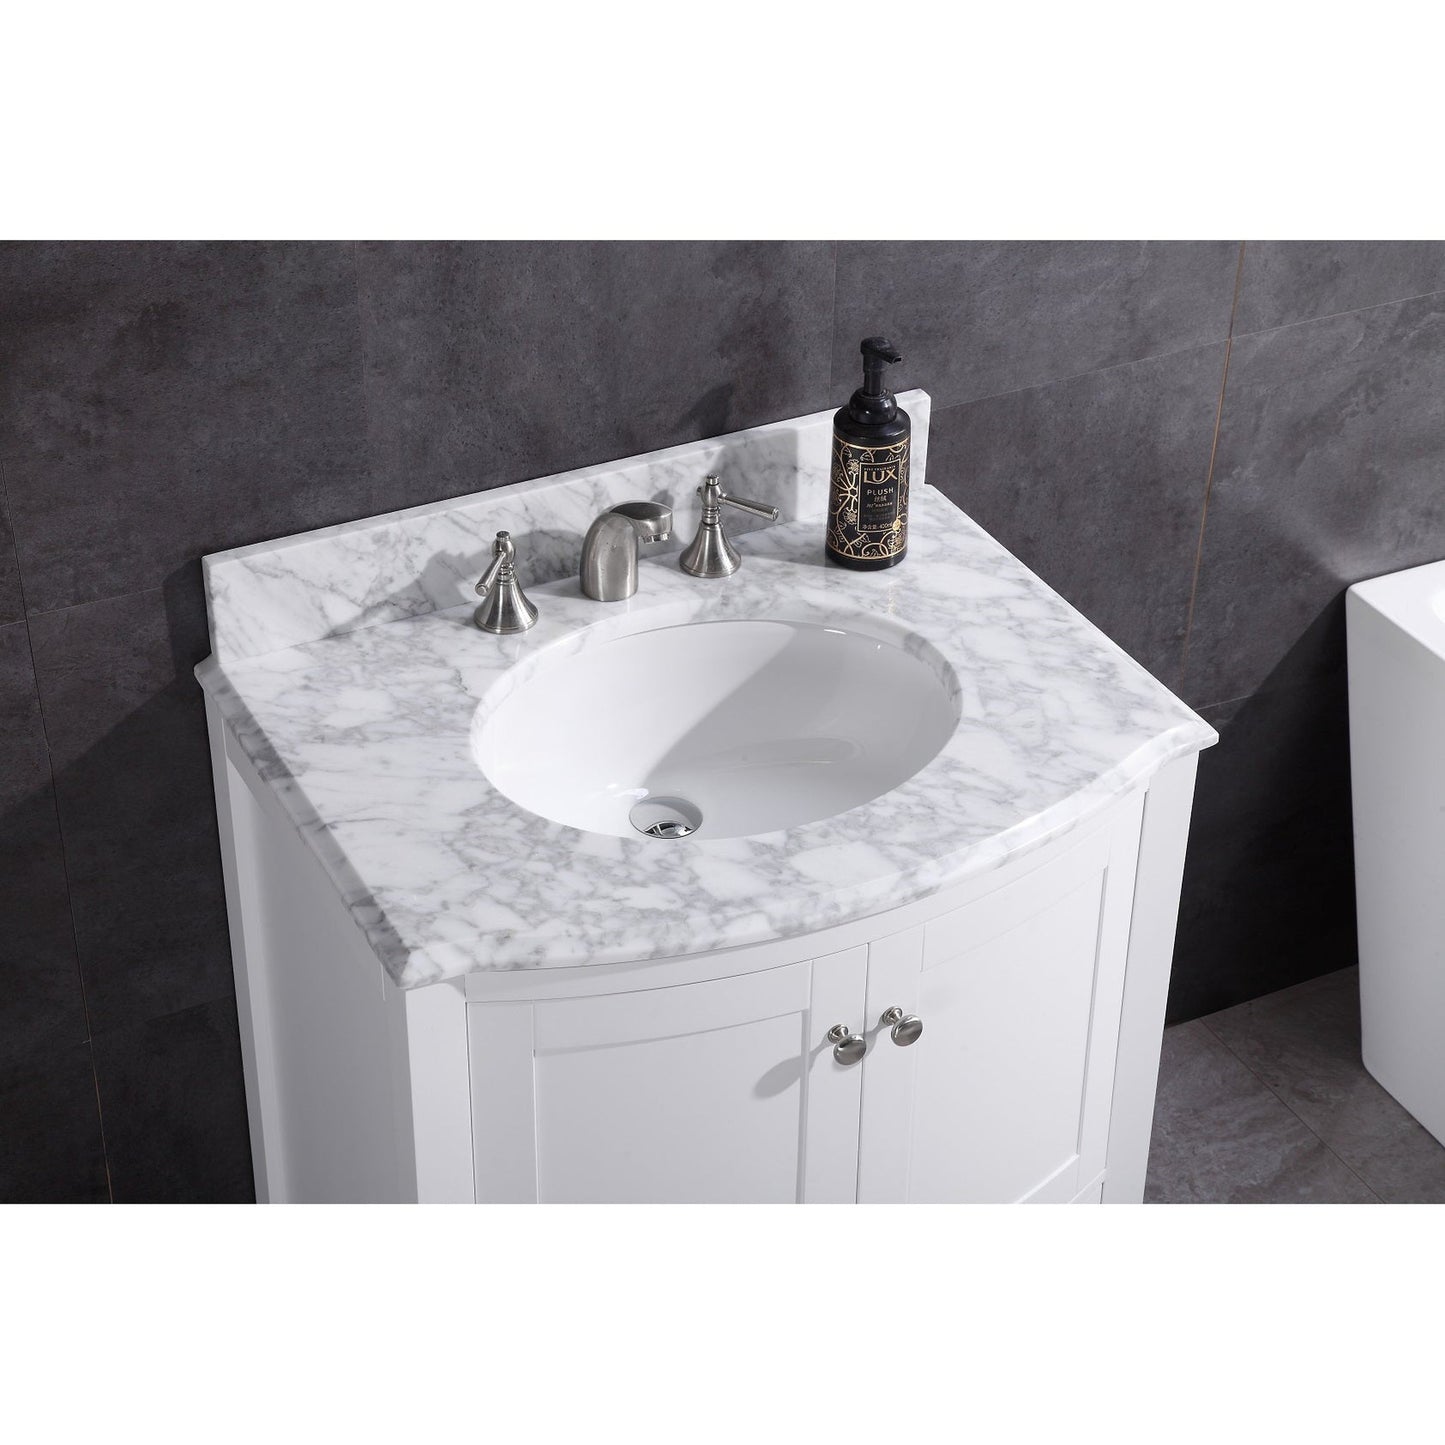 Legion Furniture WT9309 30" White Freestanding PVC Vanity Cabinet With Marble Top and White Ceramic Sink